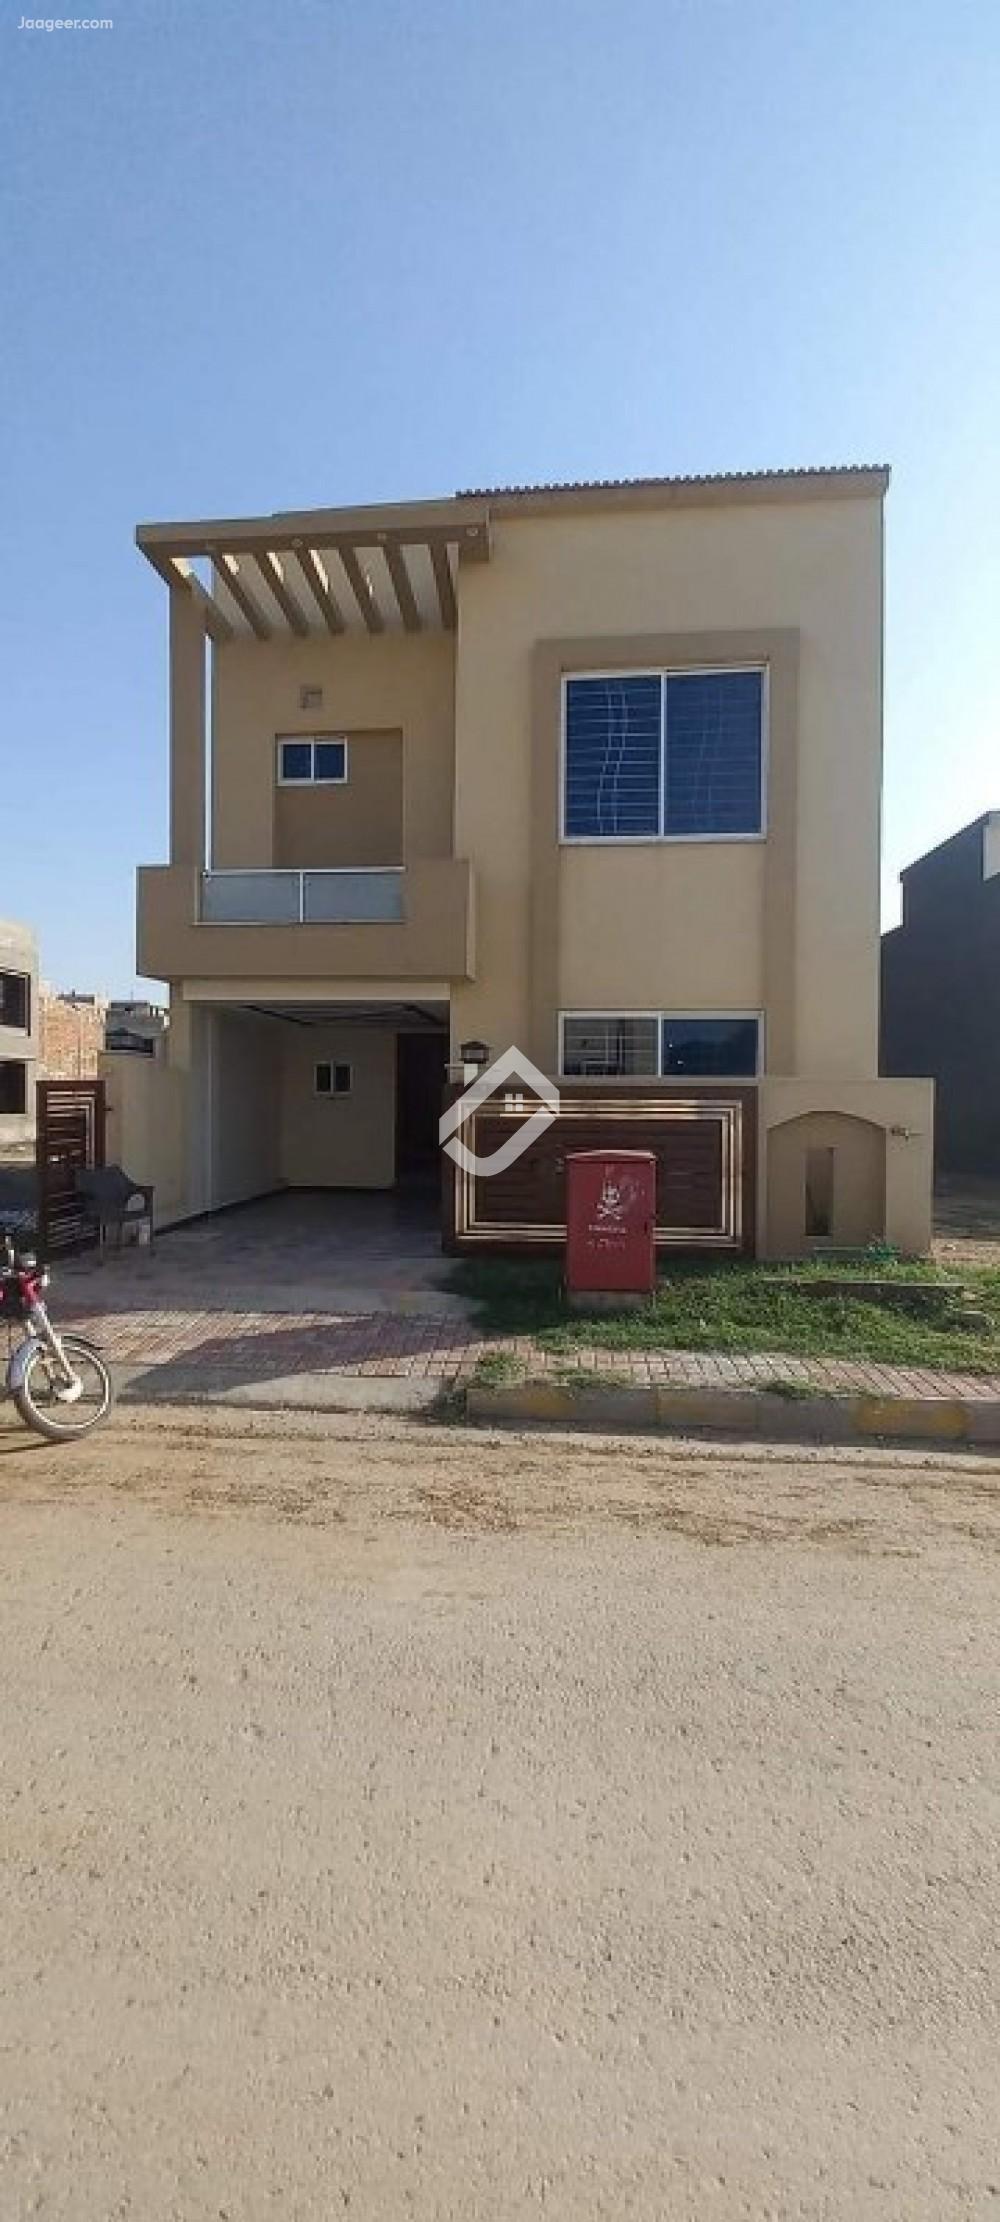 Main image 5 Marla Double Storey House For Sale In Bahria Town  Bahria Town, Islamabad